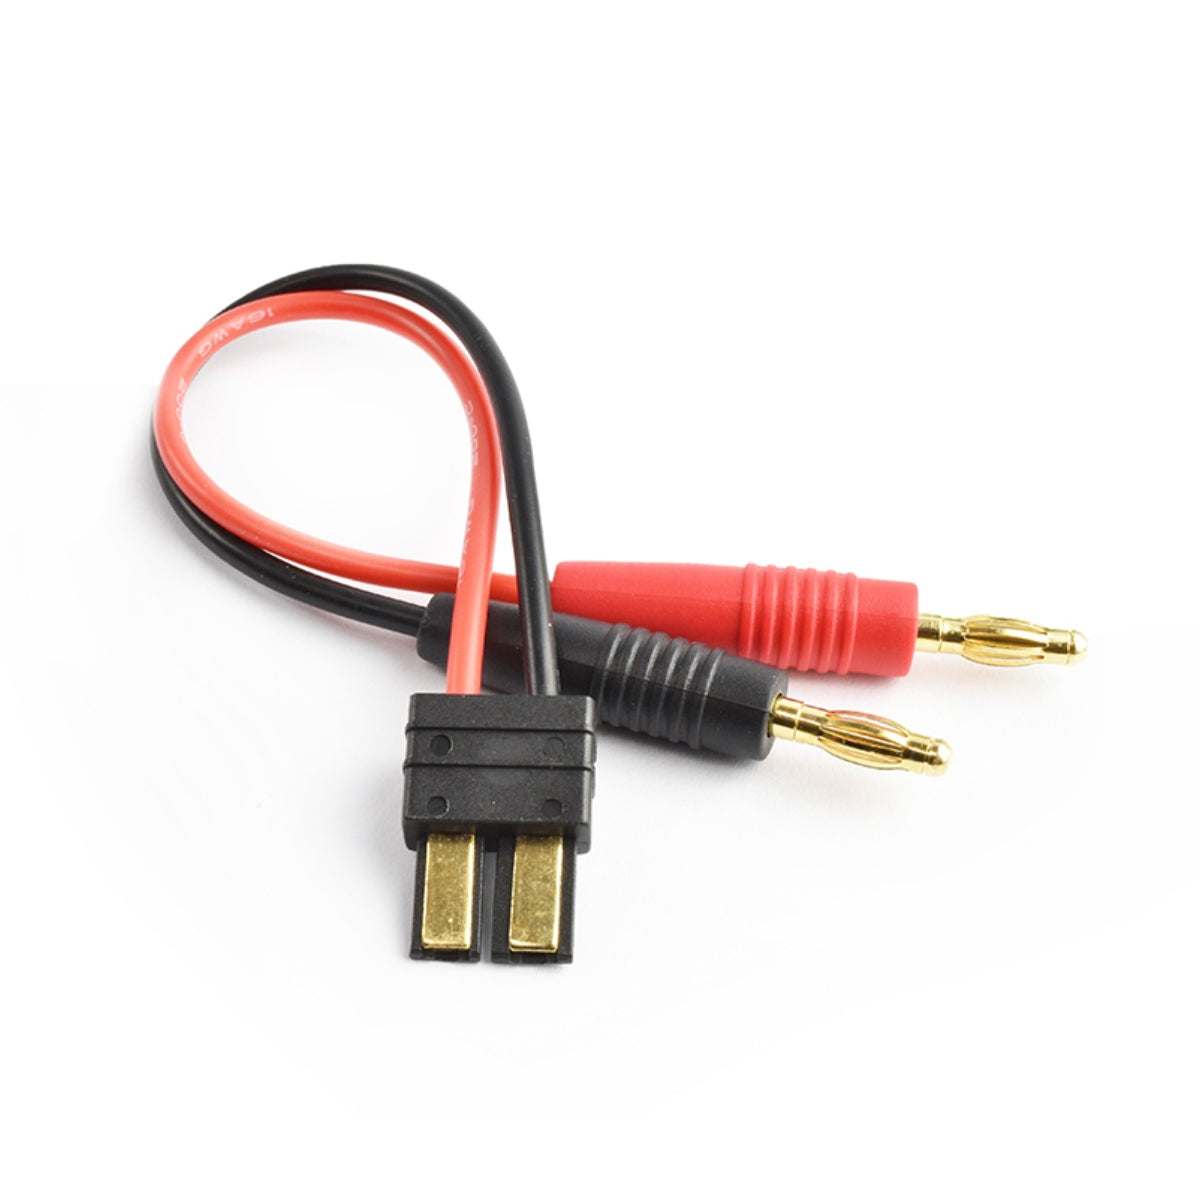 Charge Lead With 4mm Banana Plugs